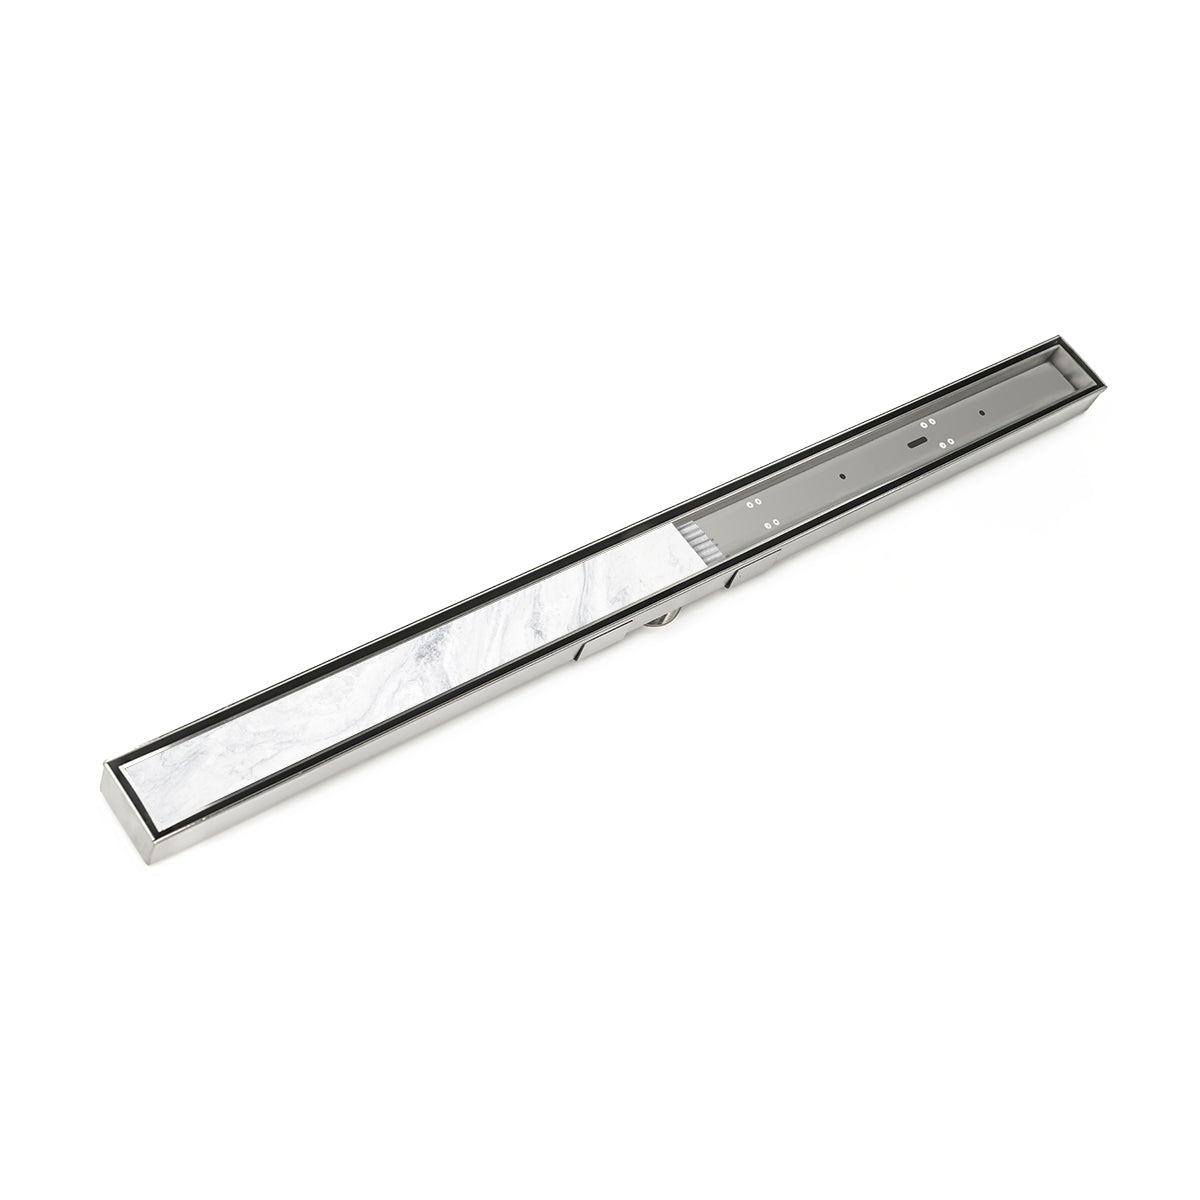 Infinity Drain 60" S-Stainless Steel Series High Flow Site Sizable Linear Drain Kit with Low Profile Tile Insert Frame with ABS Drain Body, 3" Outlet